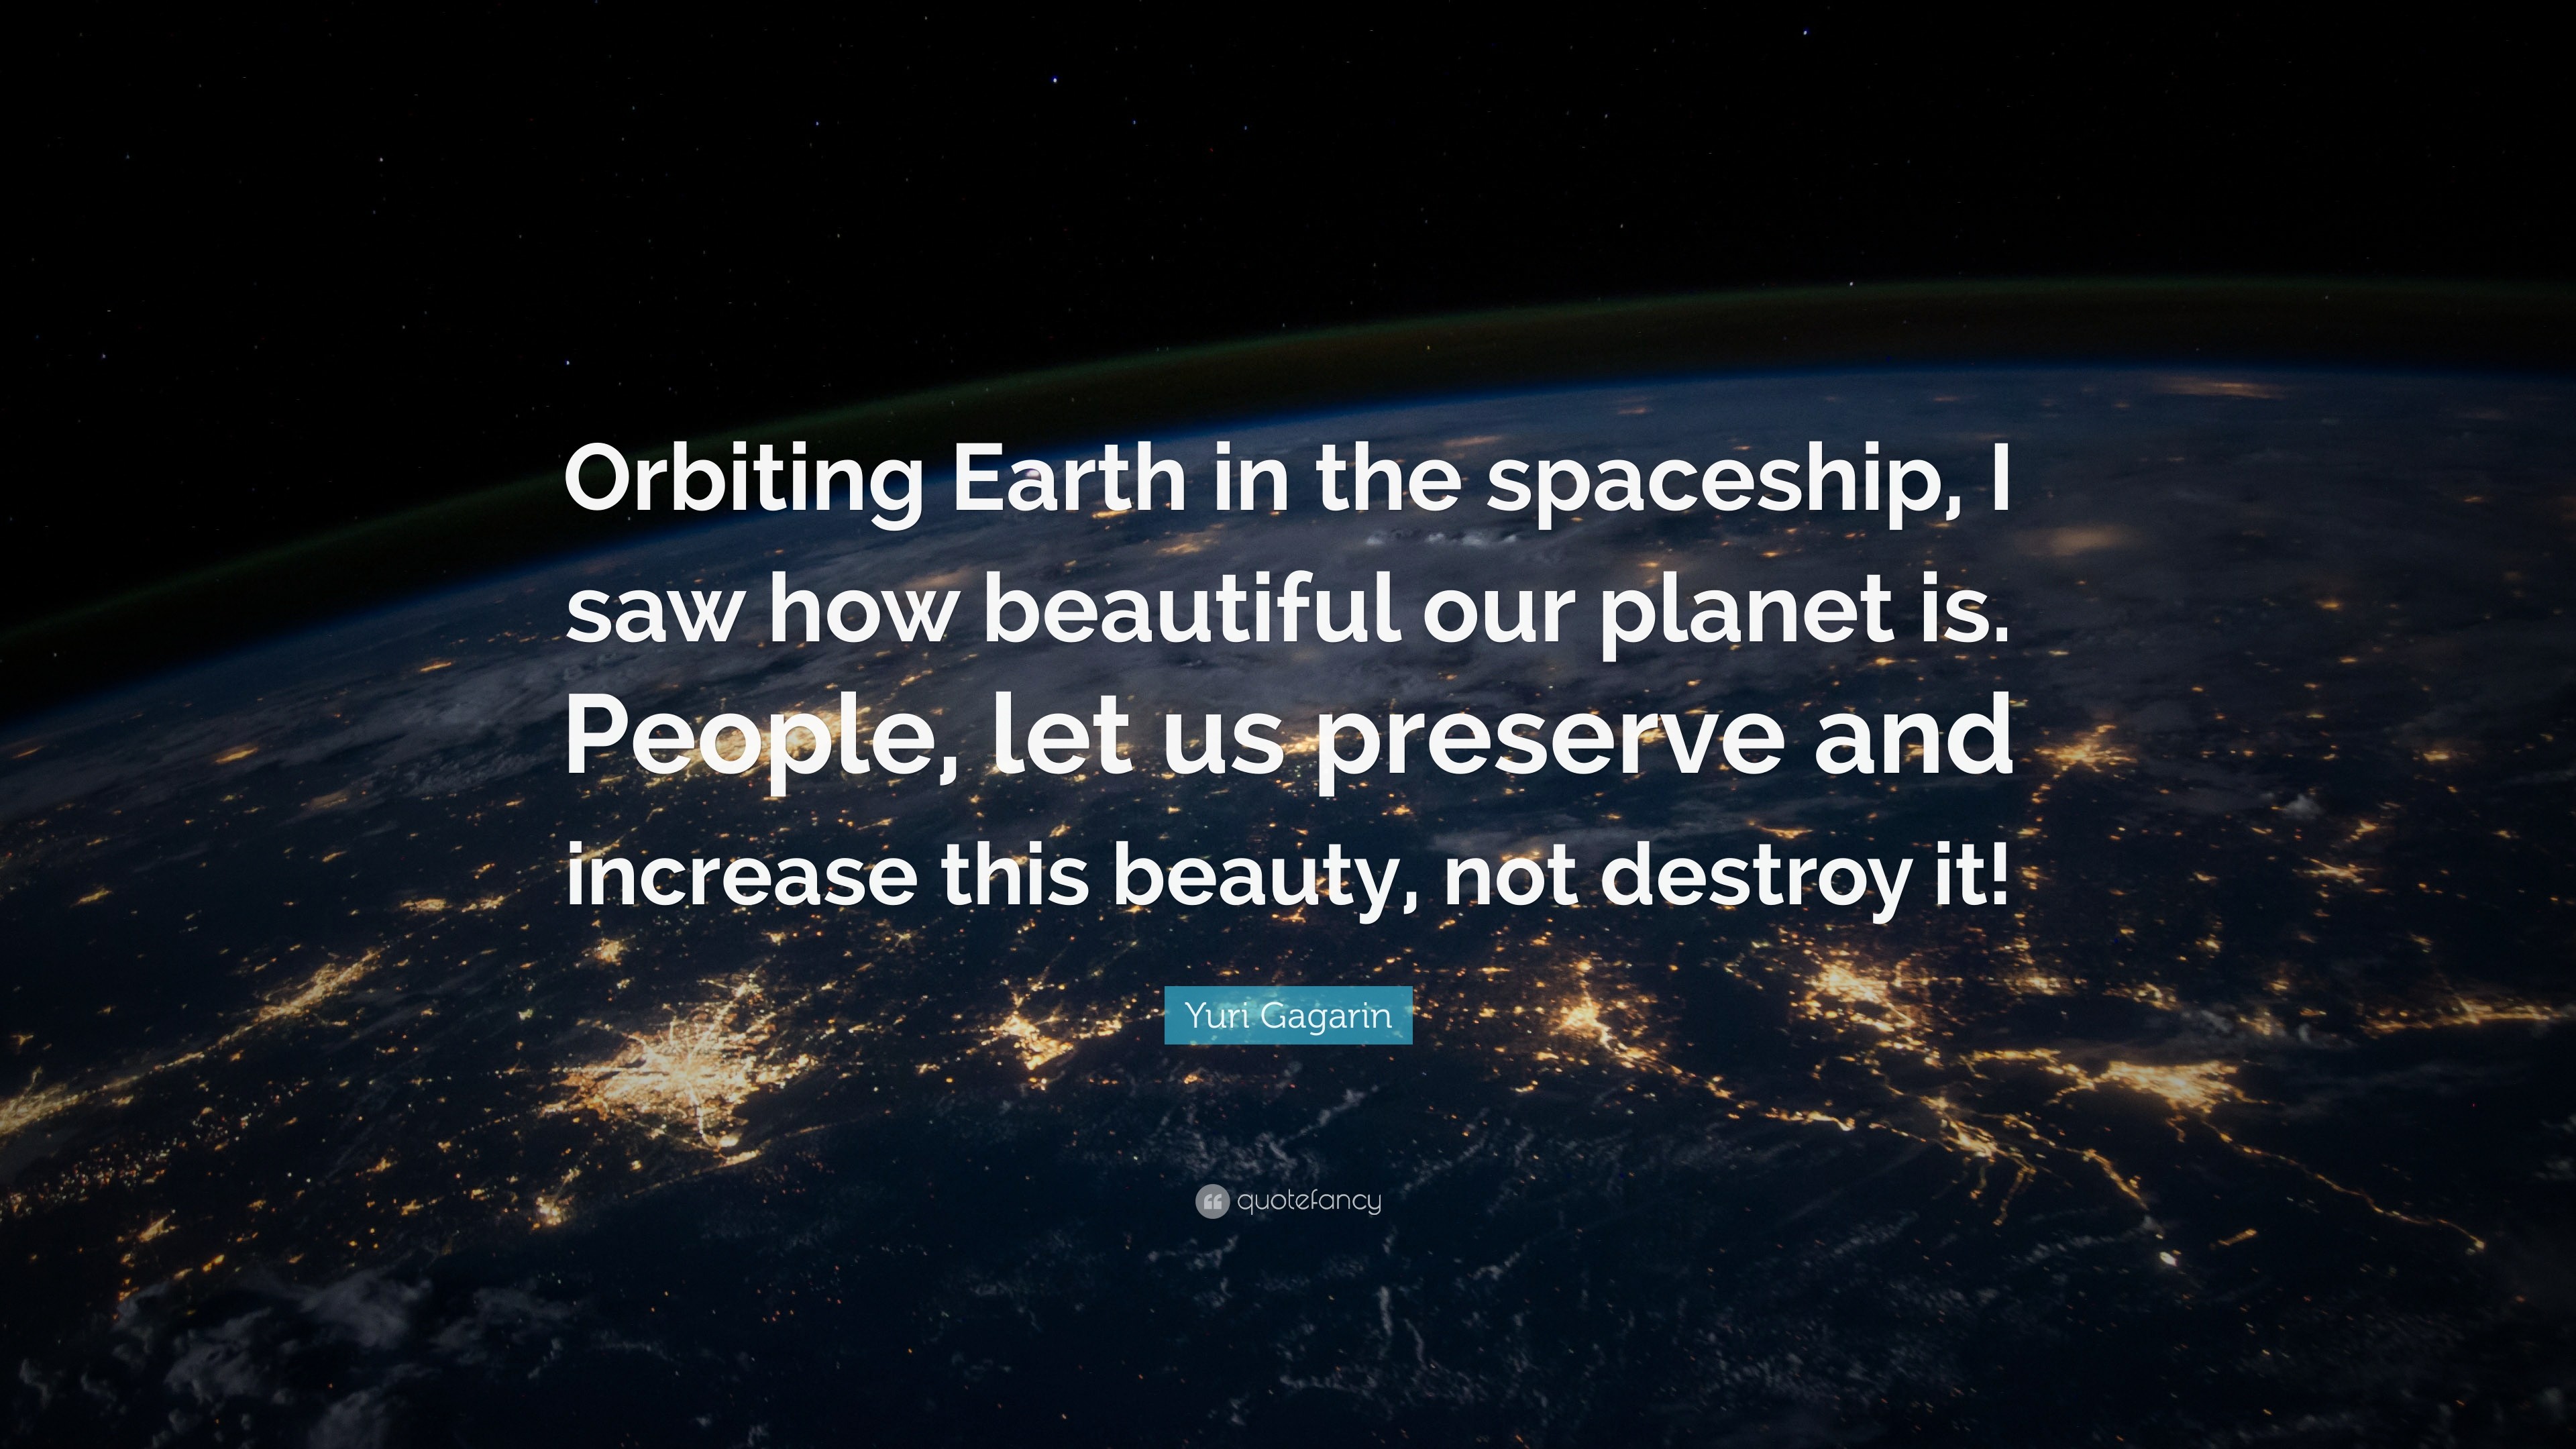 Yuri Gagarin Quote Orbiting Earth in the spaceship, I saw how beautiful our